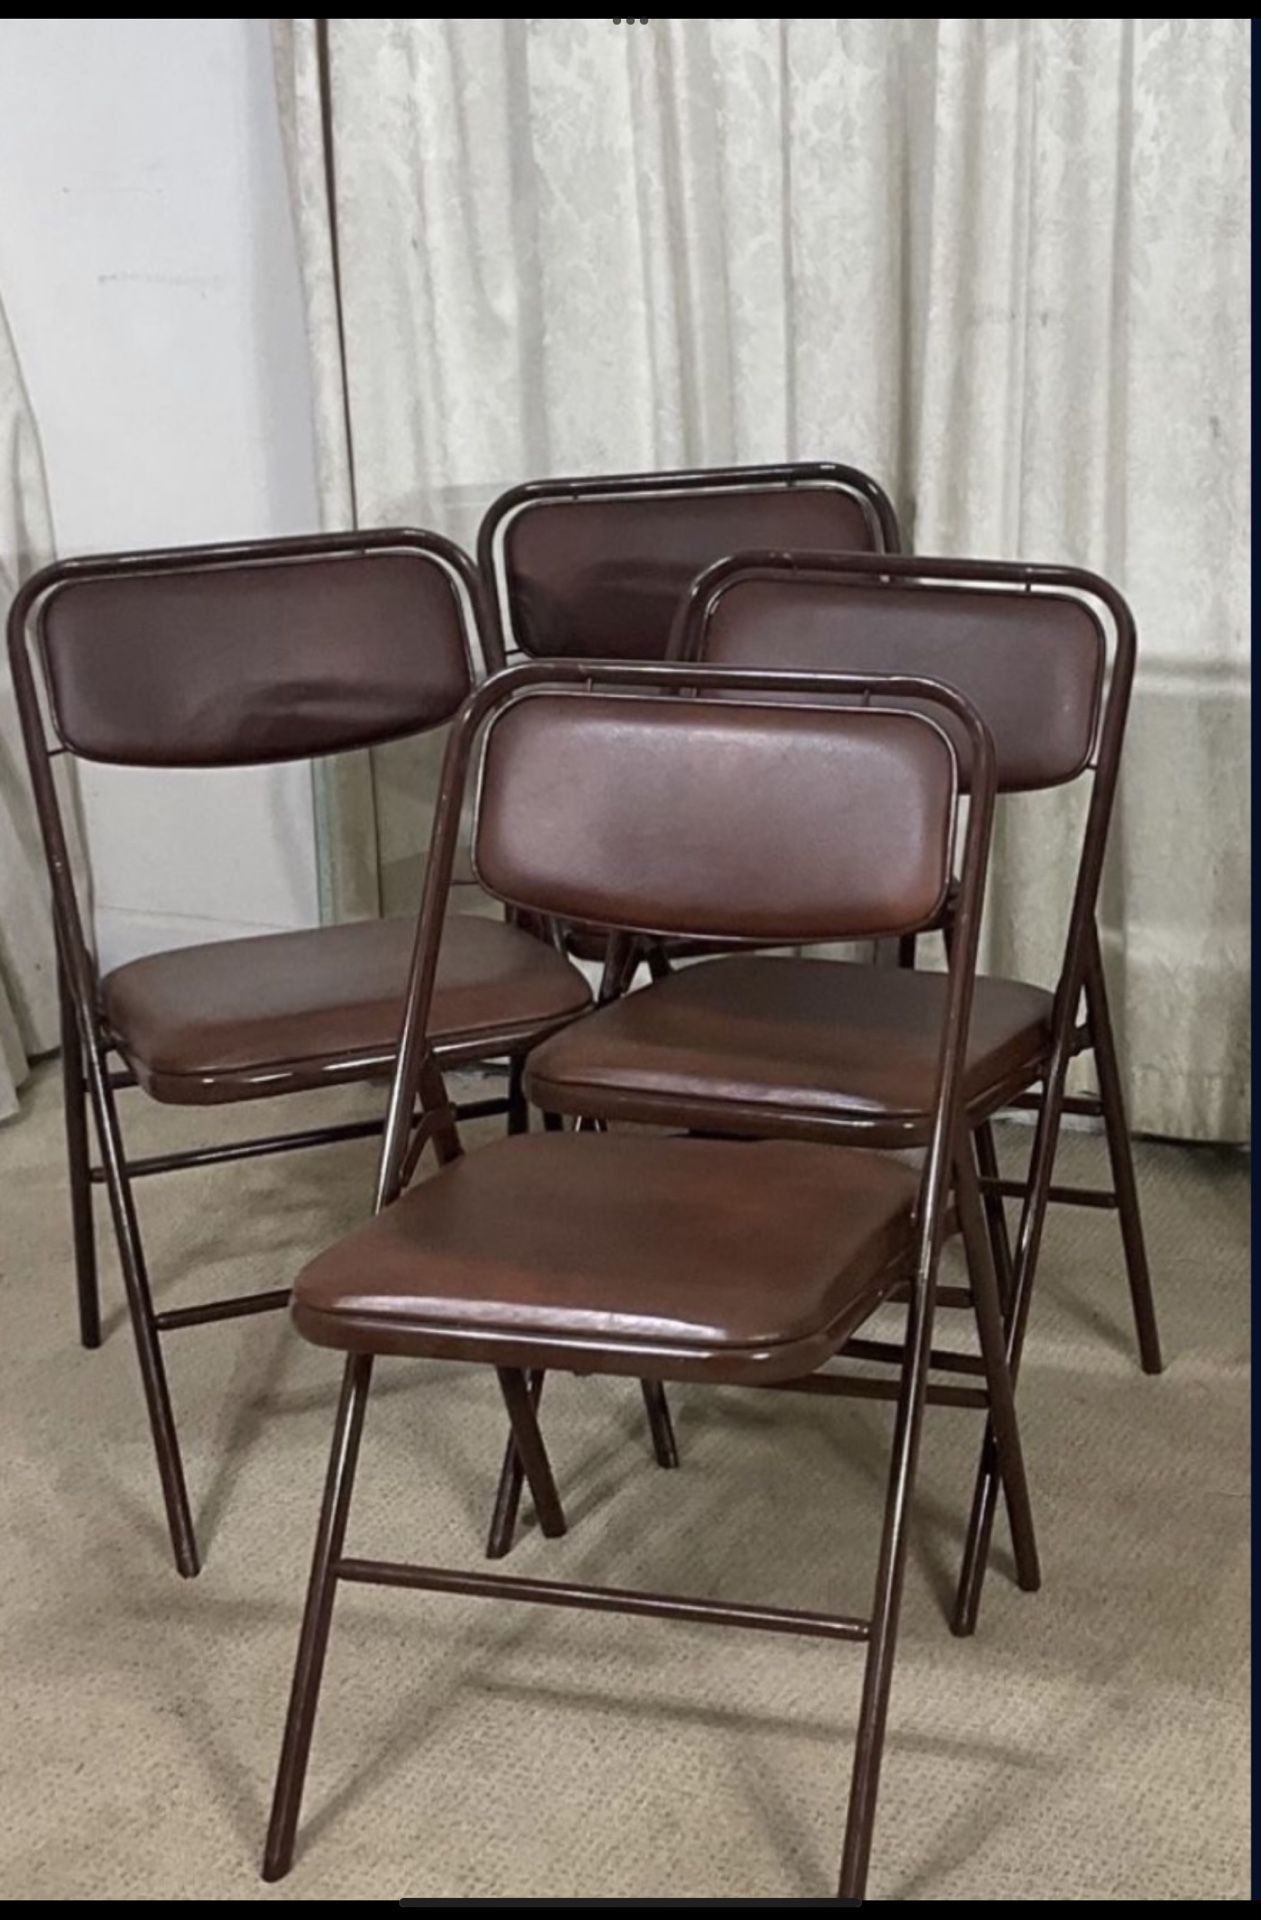 Vintage Folding Chairs With Cushioned Seats (4)